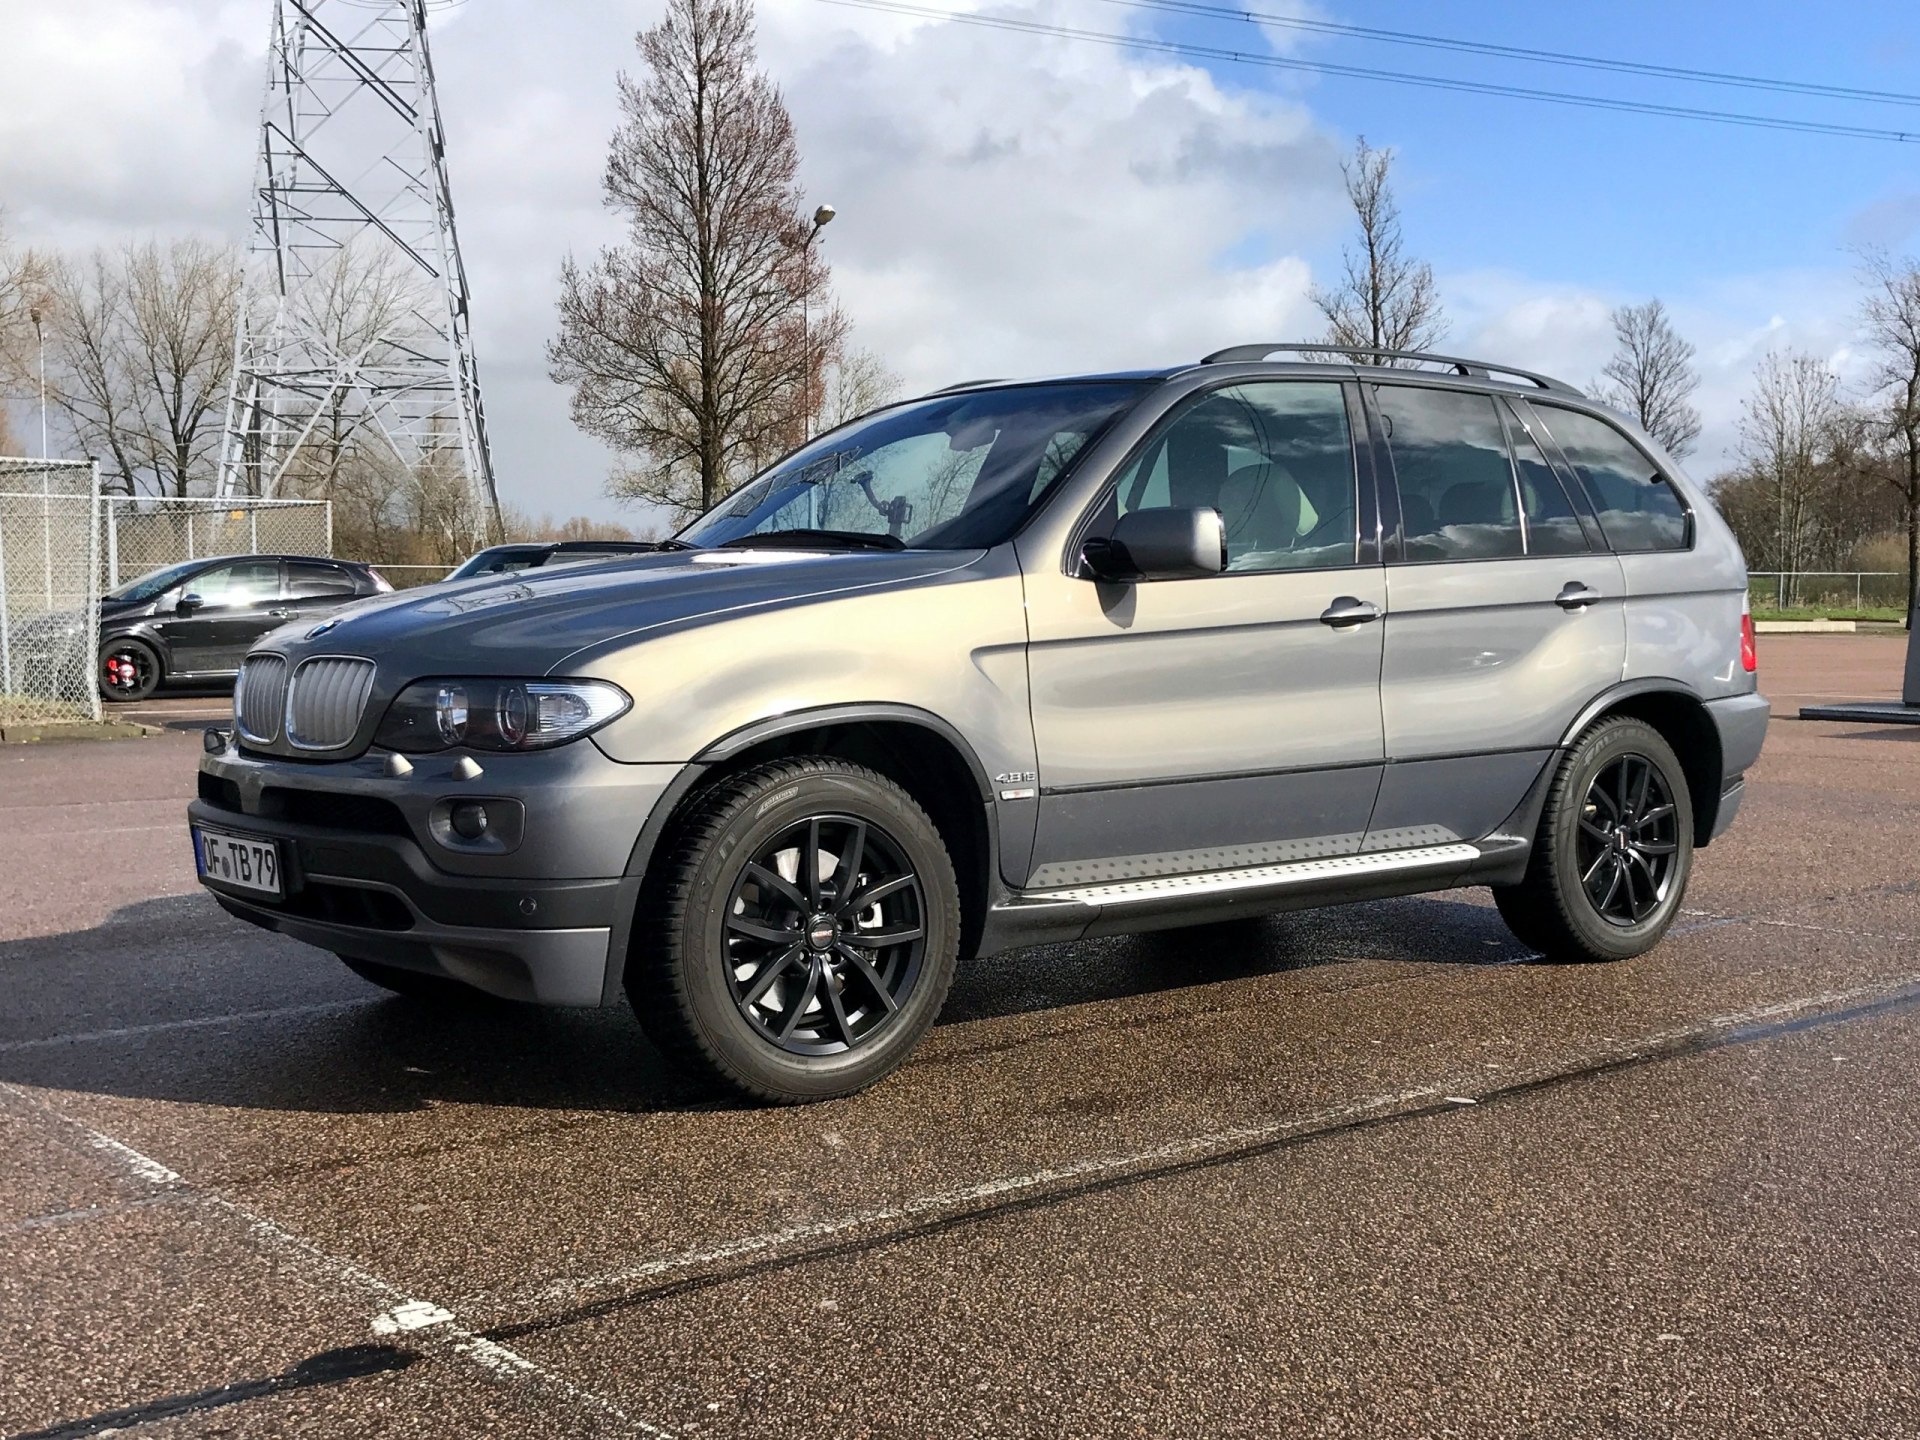 BMW X5 parked on a public parking lot. Nobody in the vehicle.